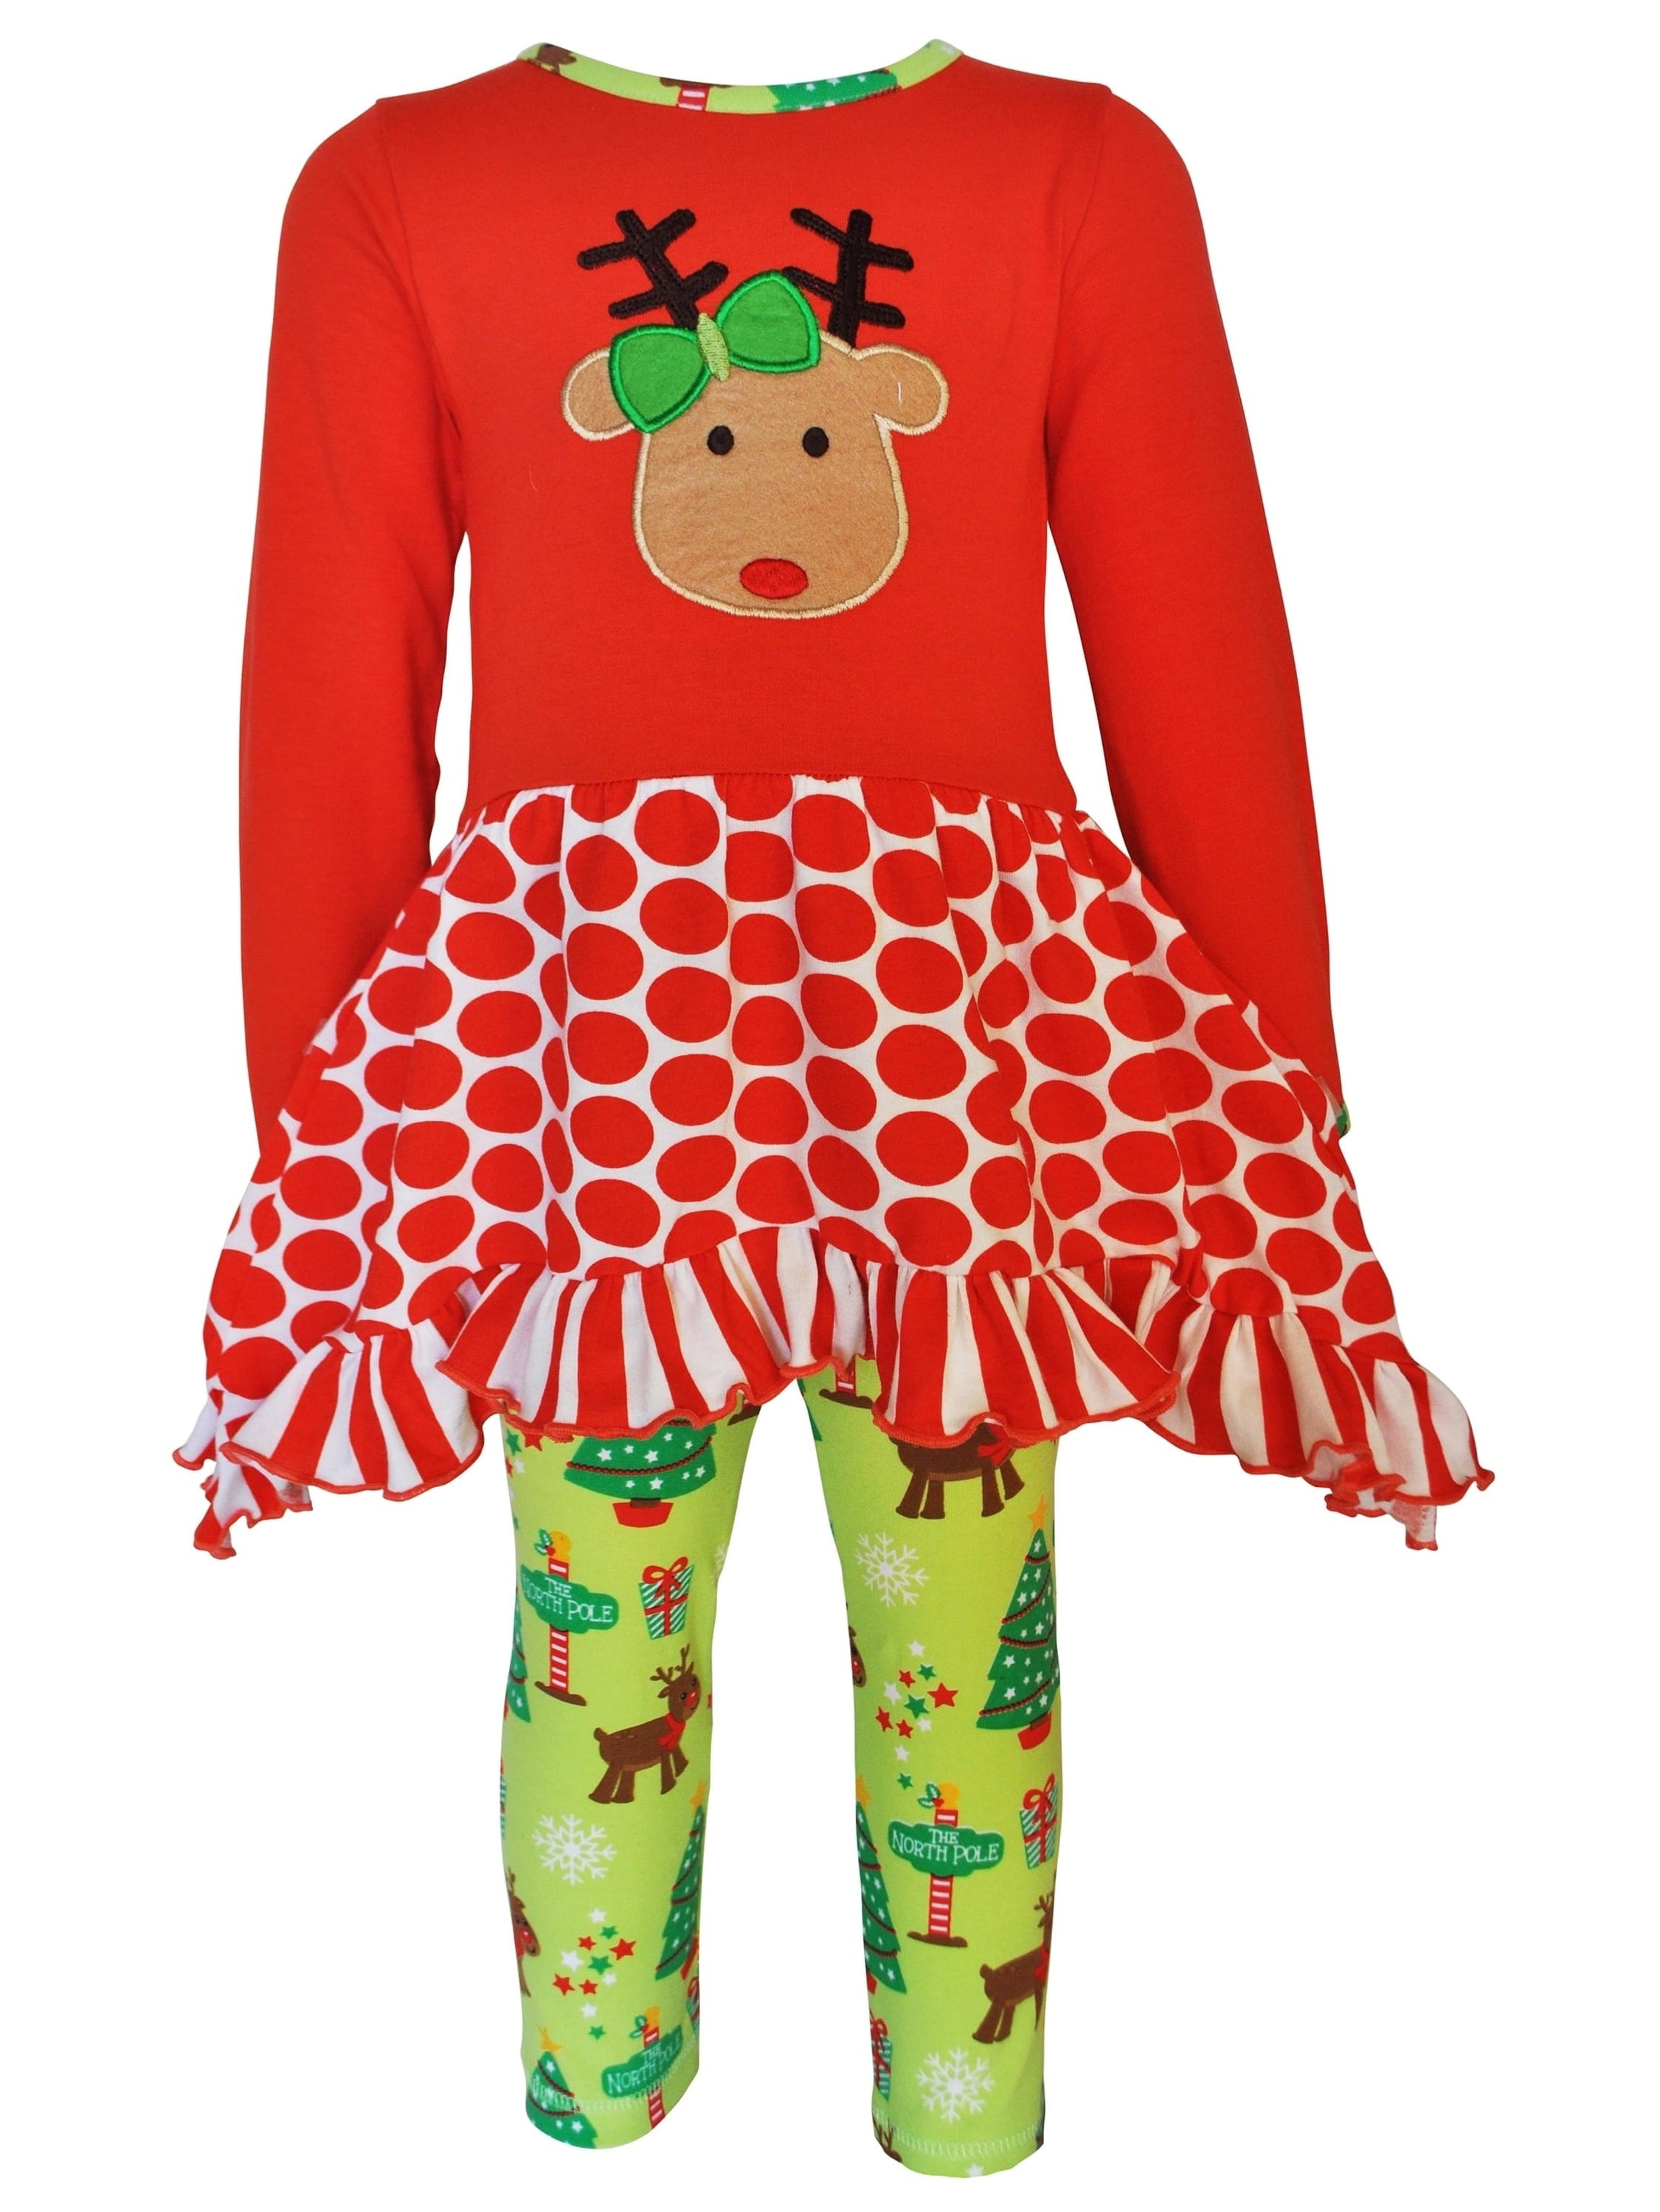 Details about   NWT Girls Size 4T Blueberi Holiday Christmas Outfit Candy Cane Dress Leggings 